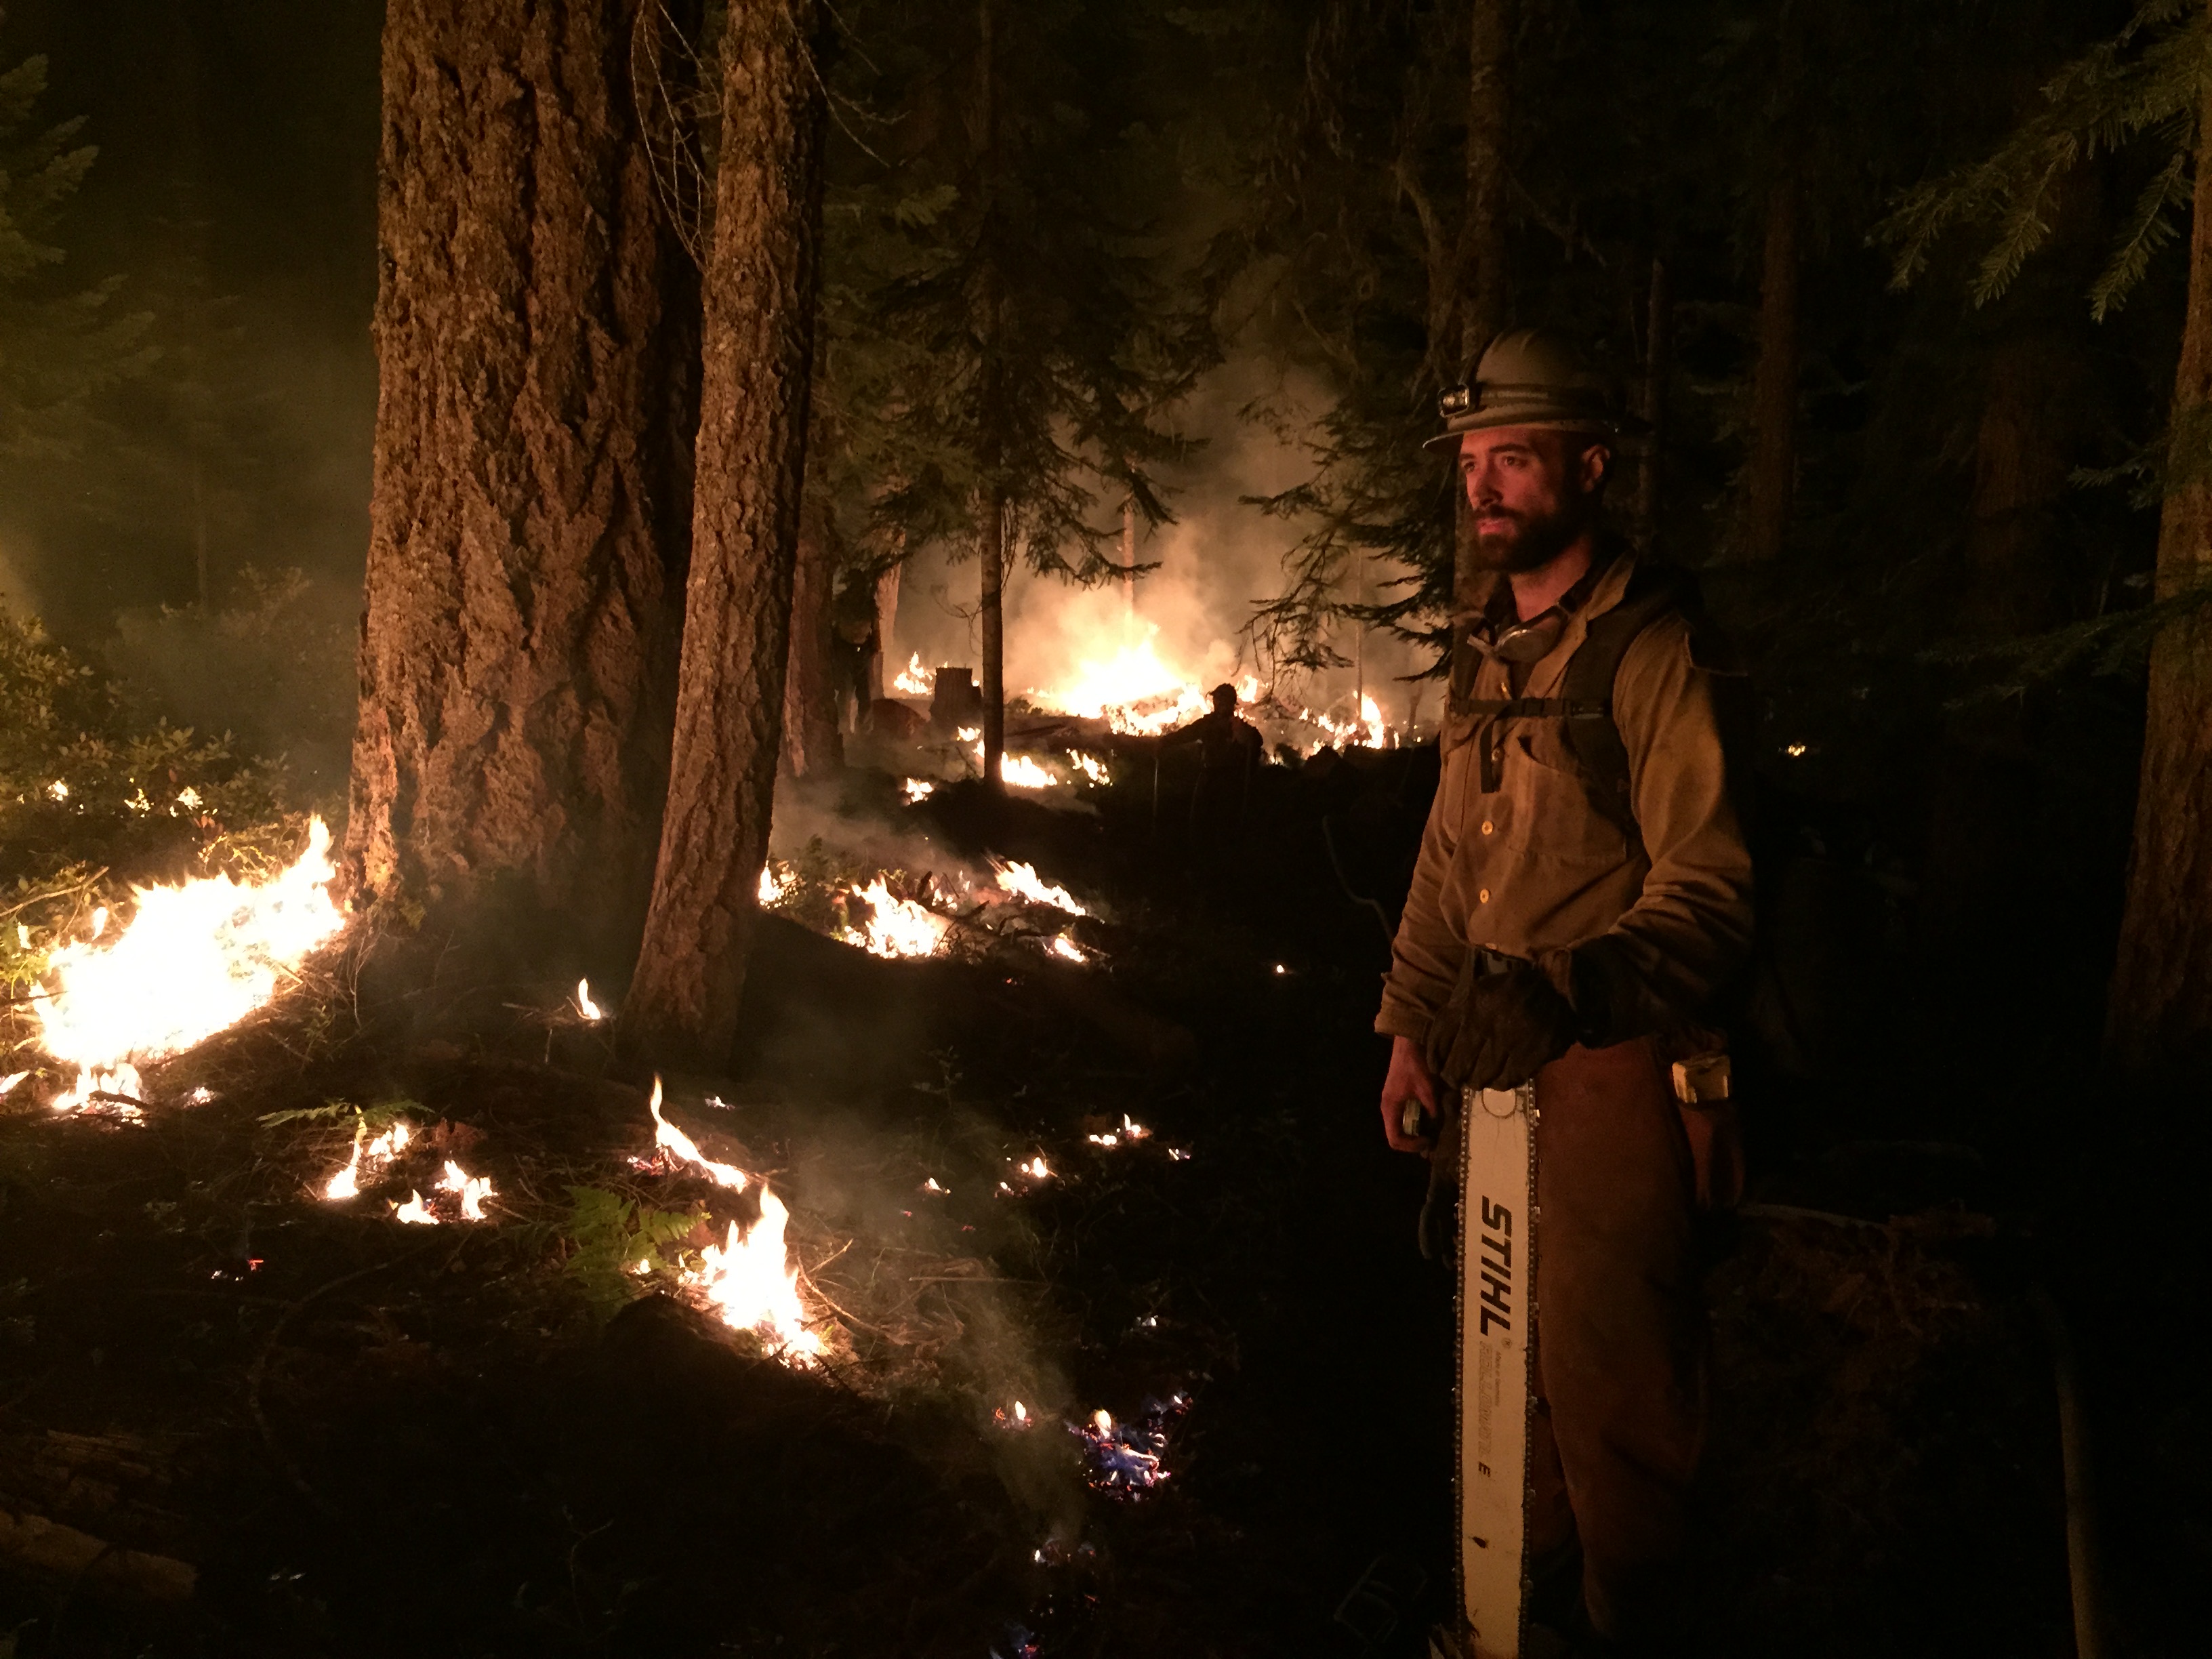 A firefighter holding a chainsaw watches flames consume underbrush